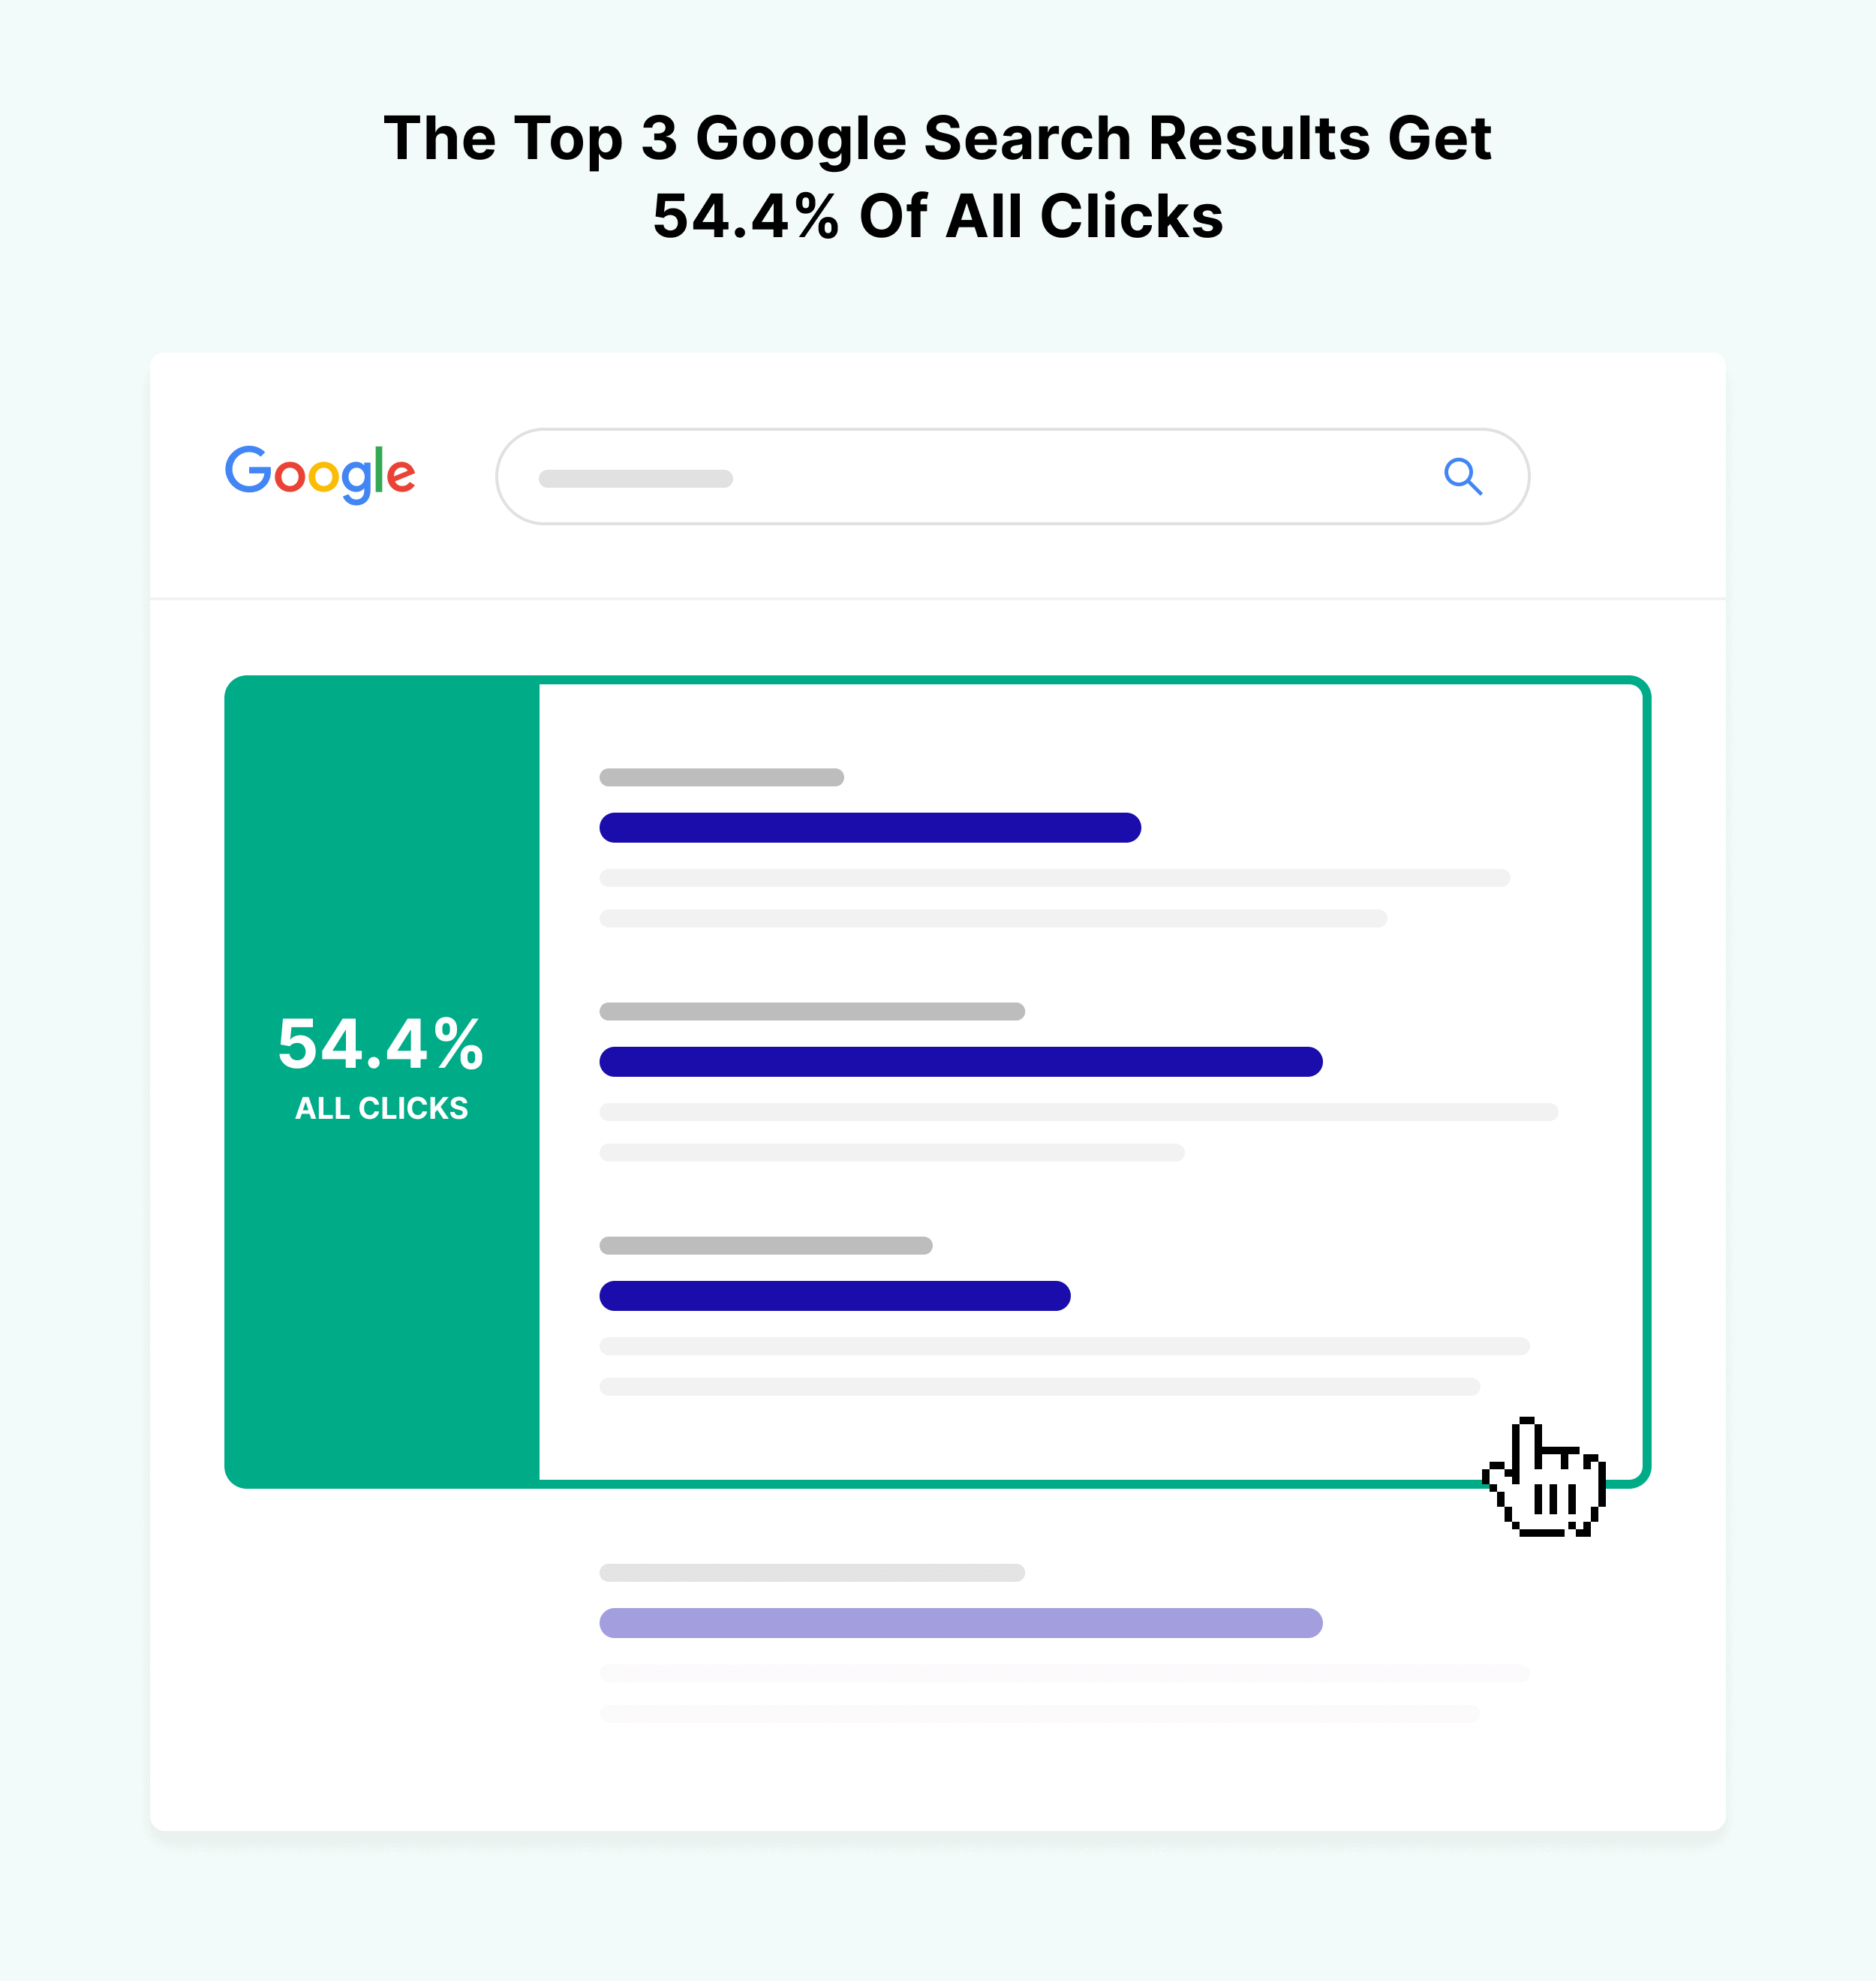 The top 3 Google search results get 54.4% of all clicks